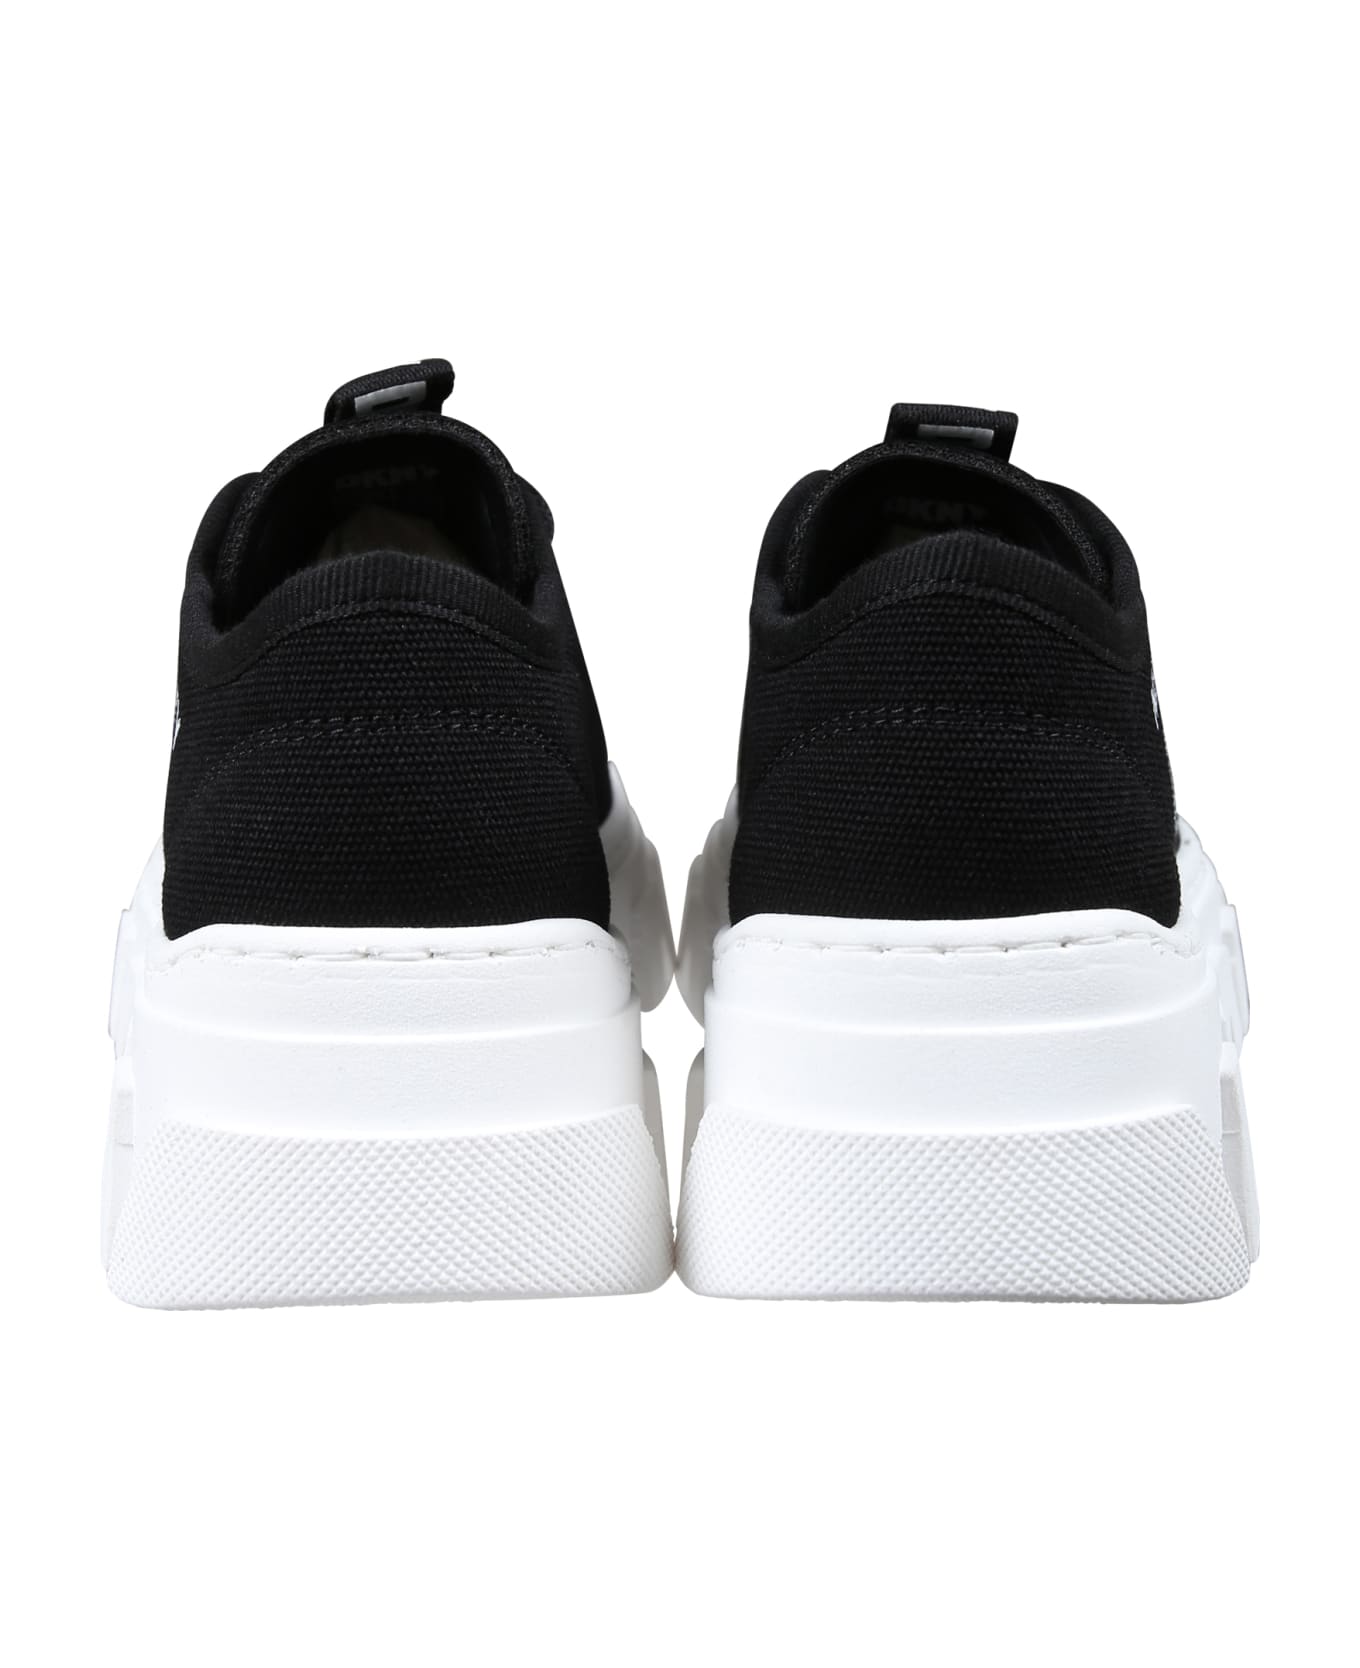 DKNY Black Sneakers For Girl With Logo - Black